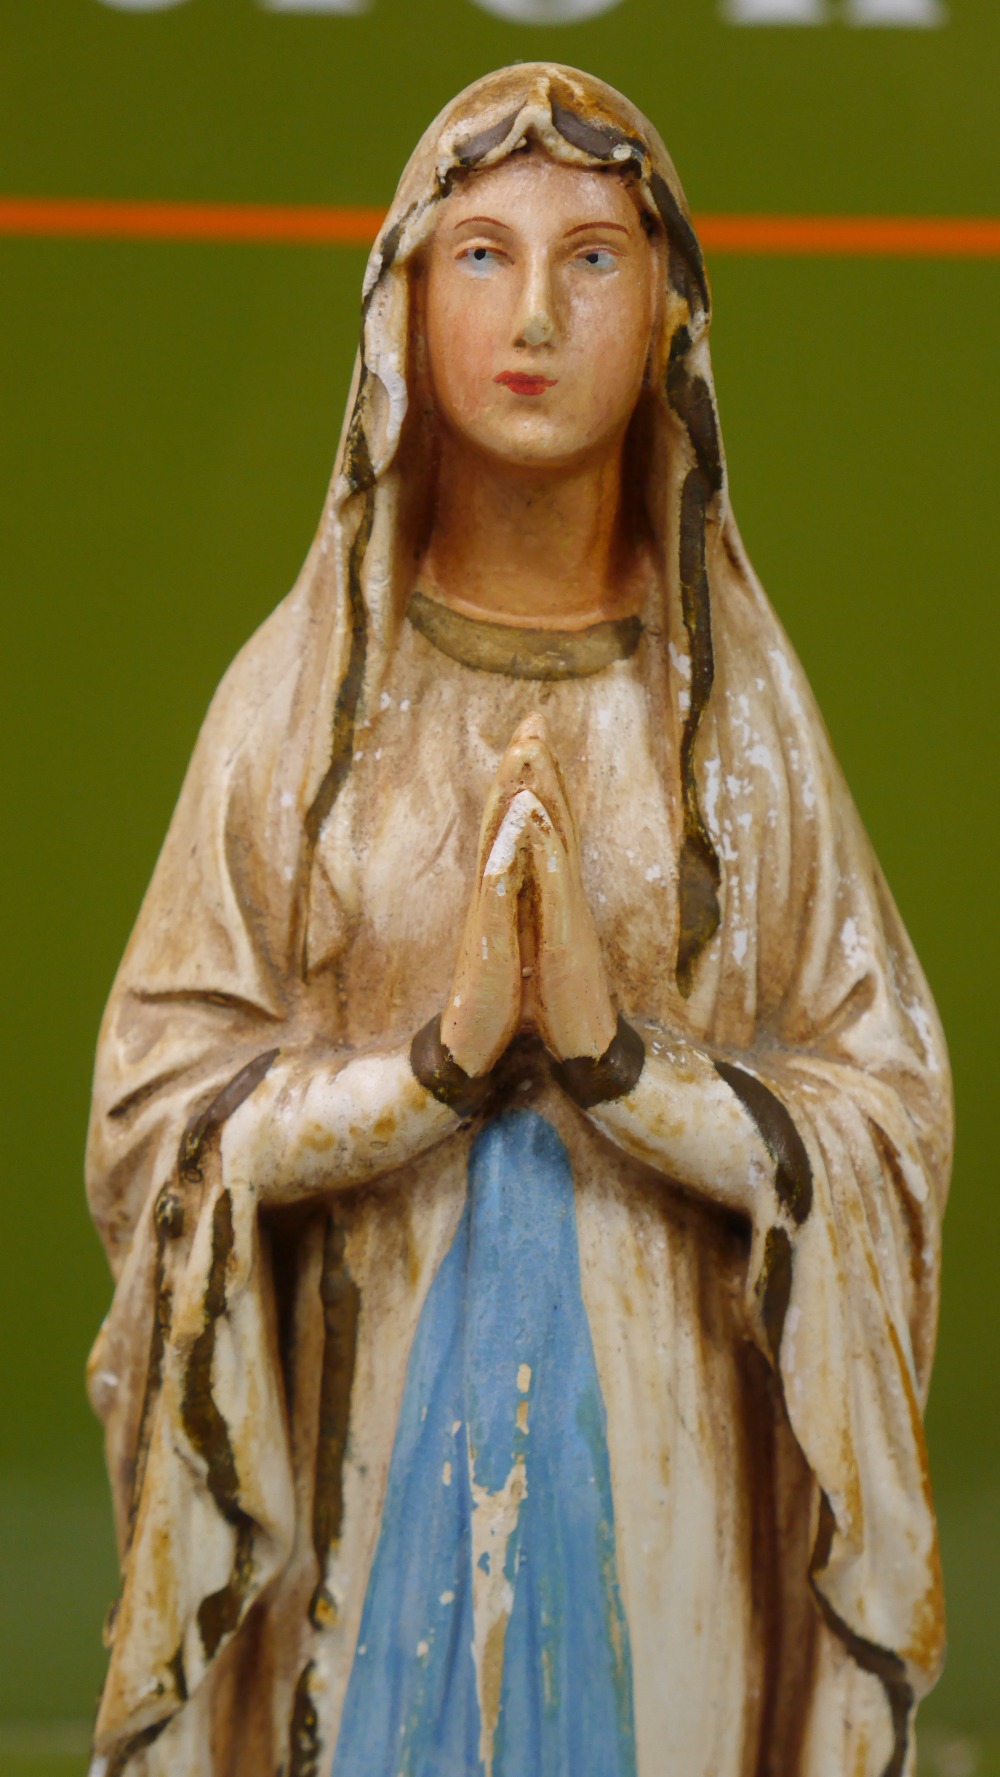 Virgin Mary Our Lady of Lourdes Oostakker Bisque Porcelain Religious Statue - Image 7 of 7